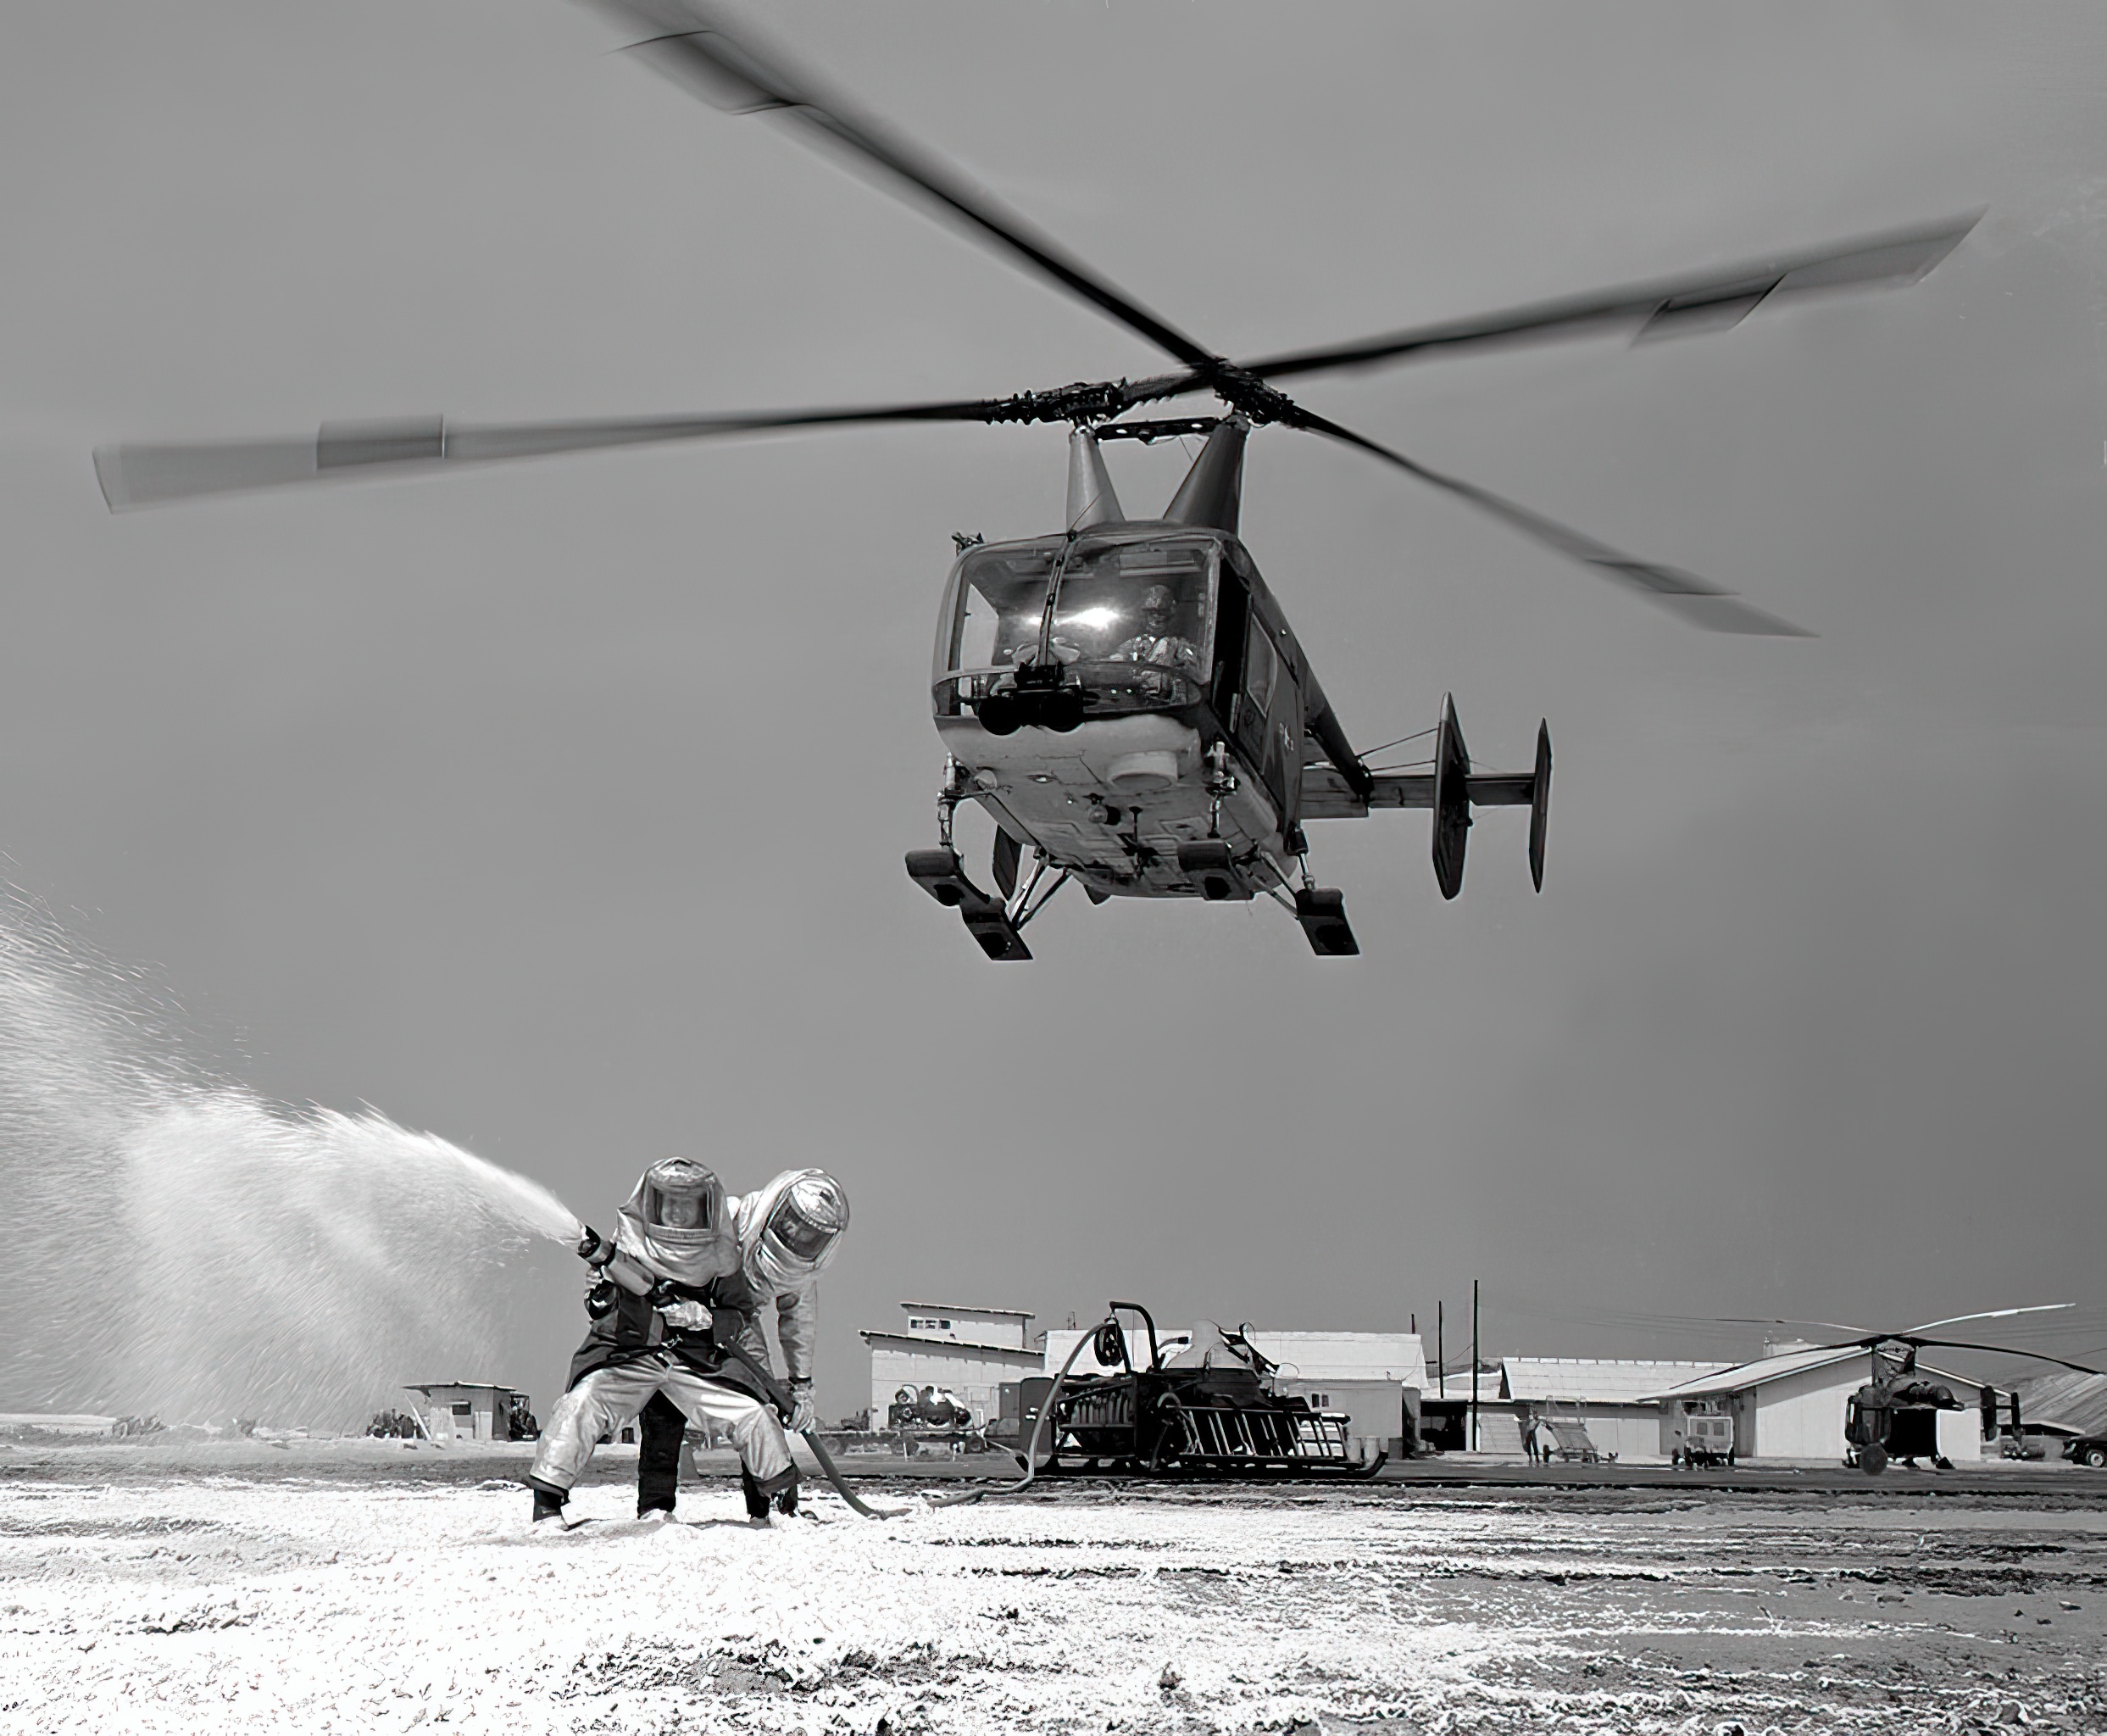 A USAF Huskie aids a practice firefighting operation at Cam Ranh Bay Air Base, Vietnam in 1968